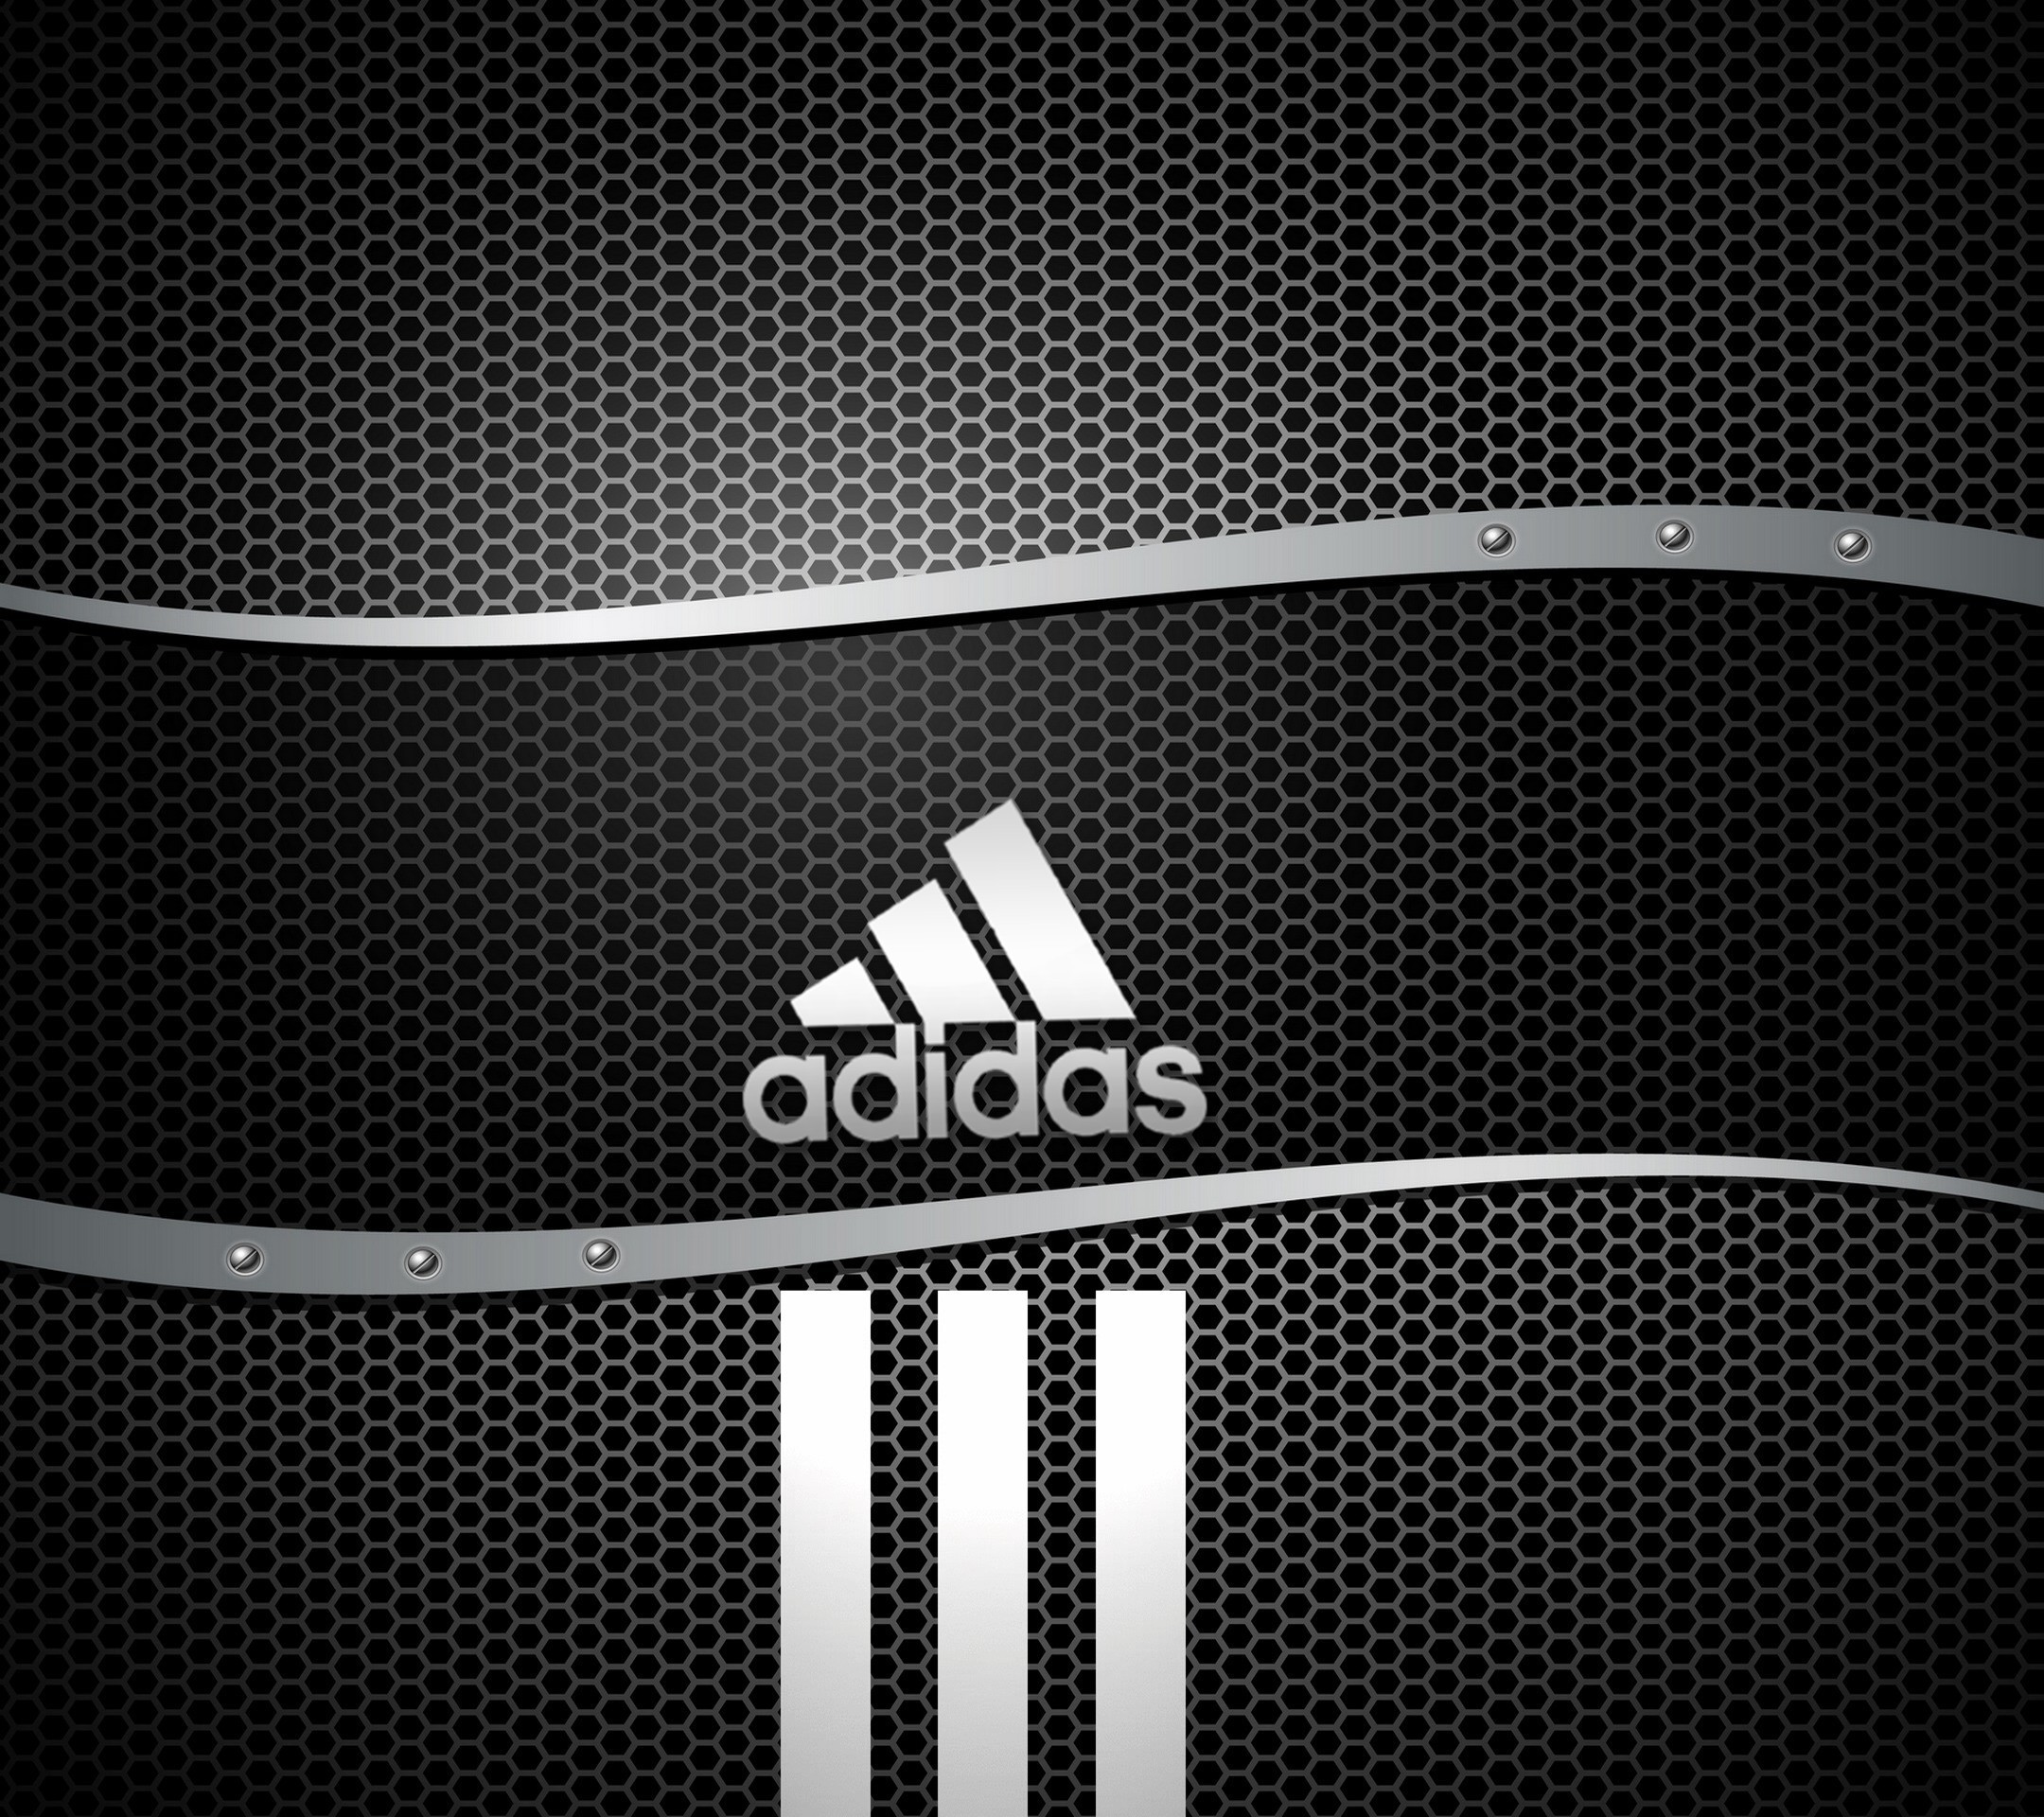 Red Adidas Wallpaper Hd Iphone